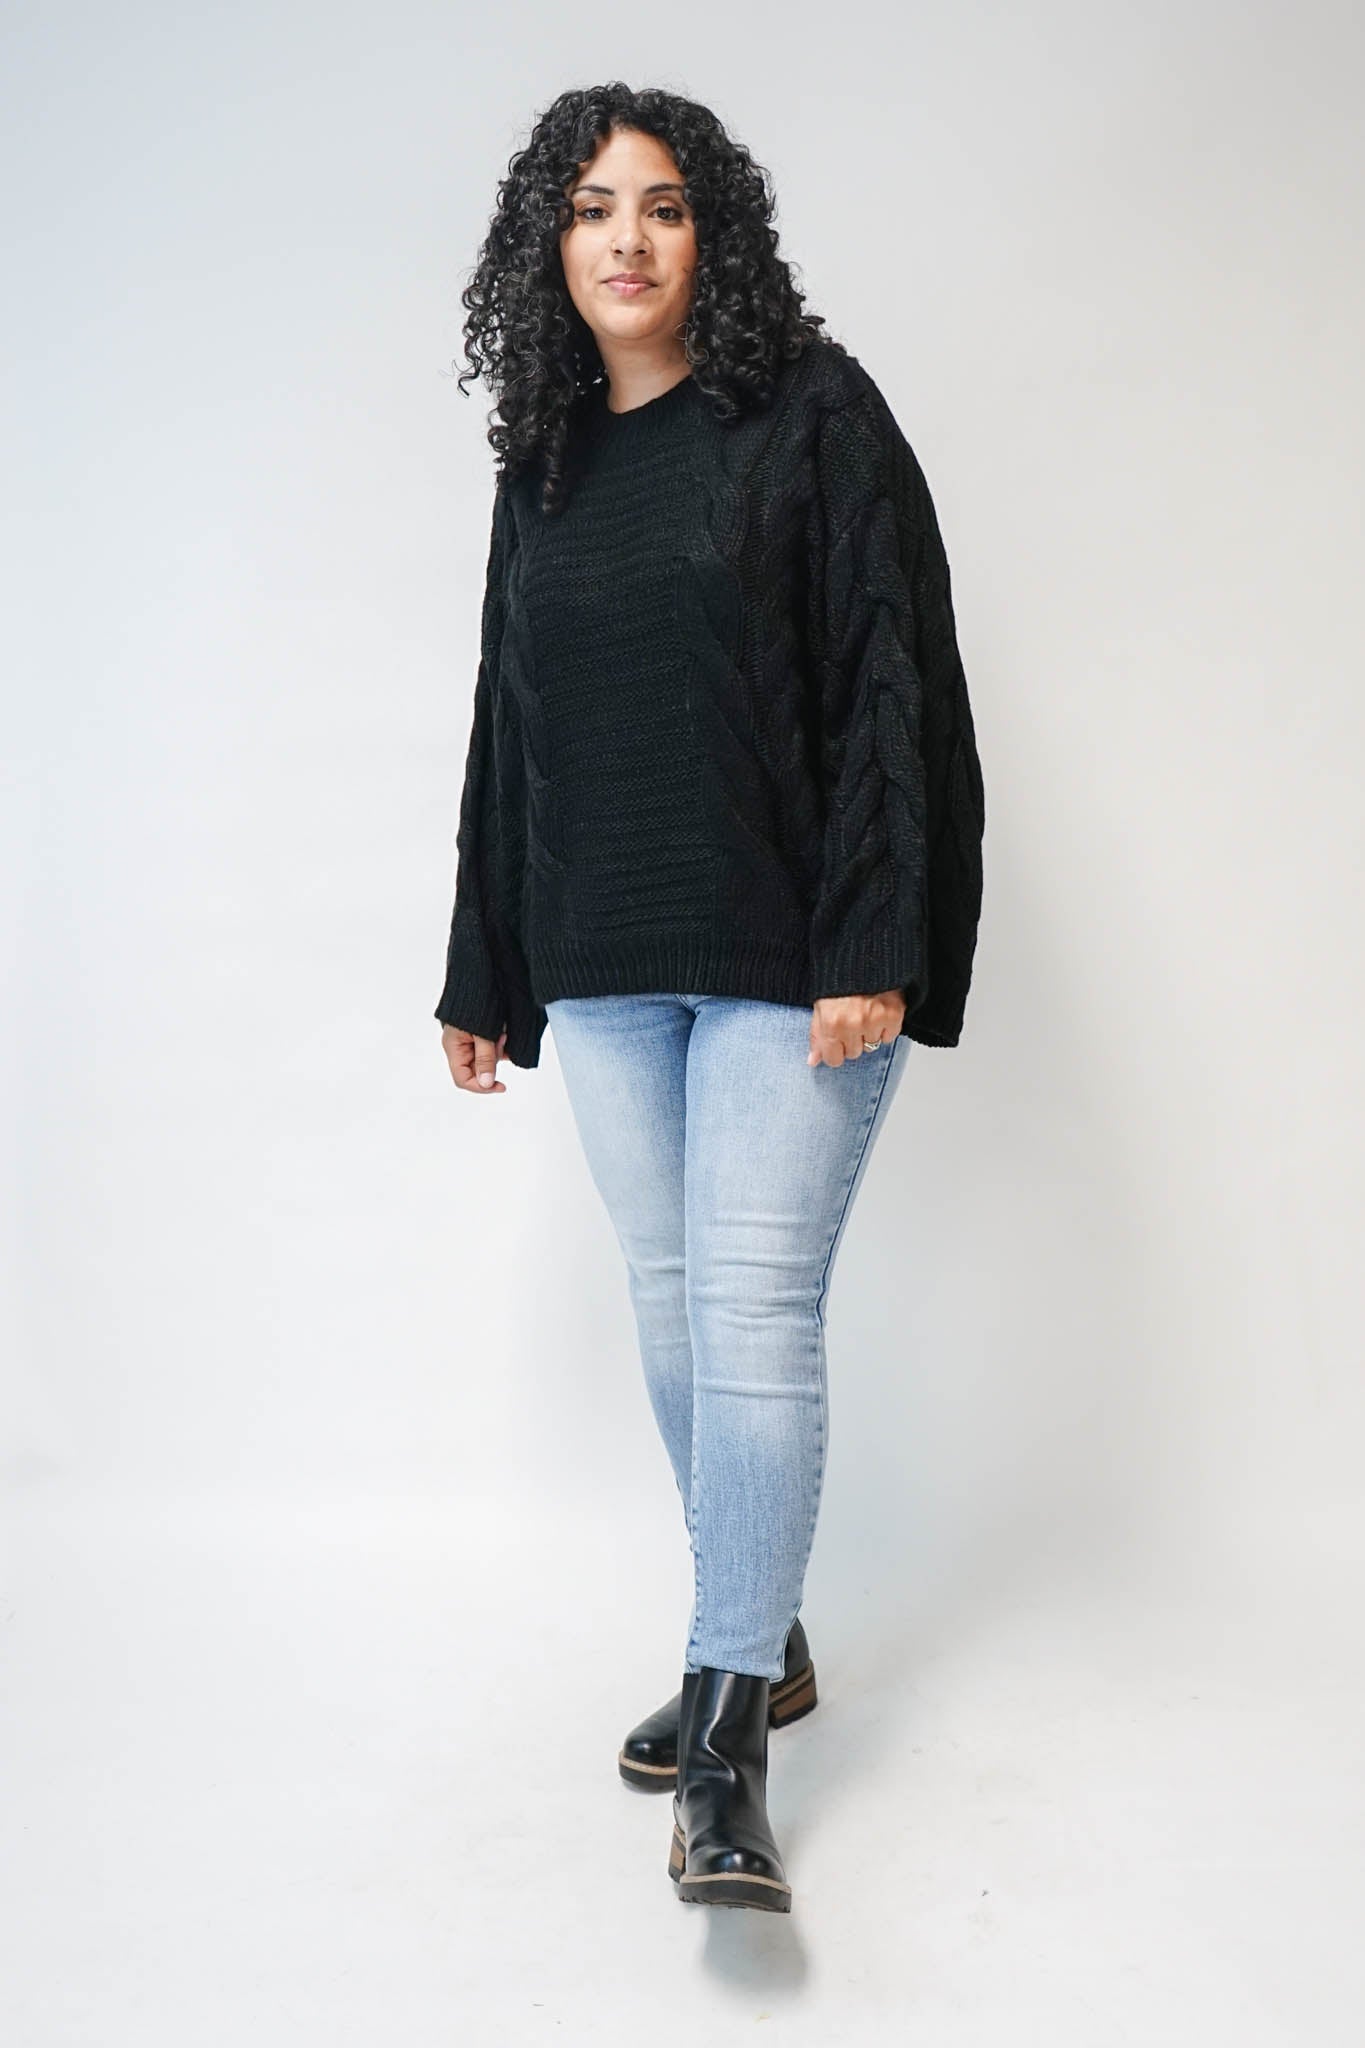 Mary Bell Sleeve Cable Knit Sweater in Black